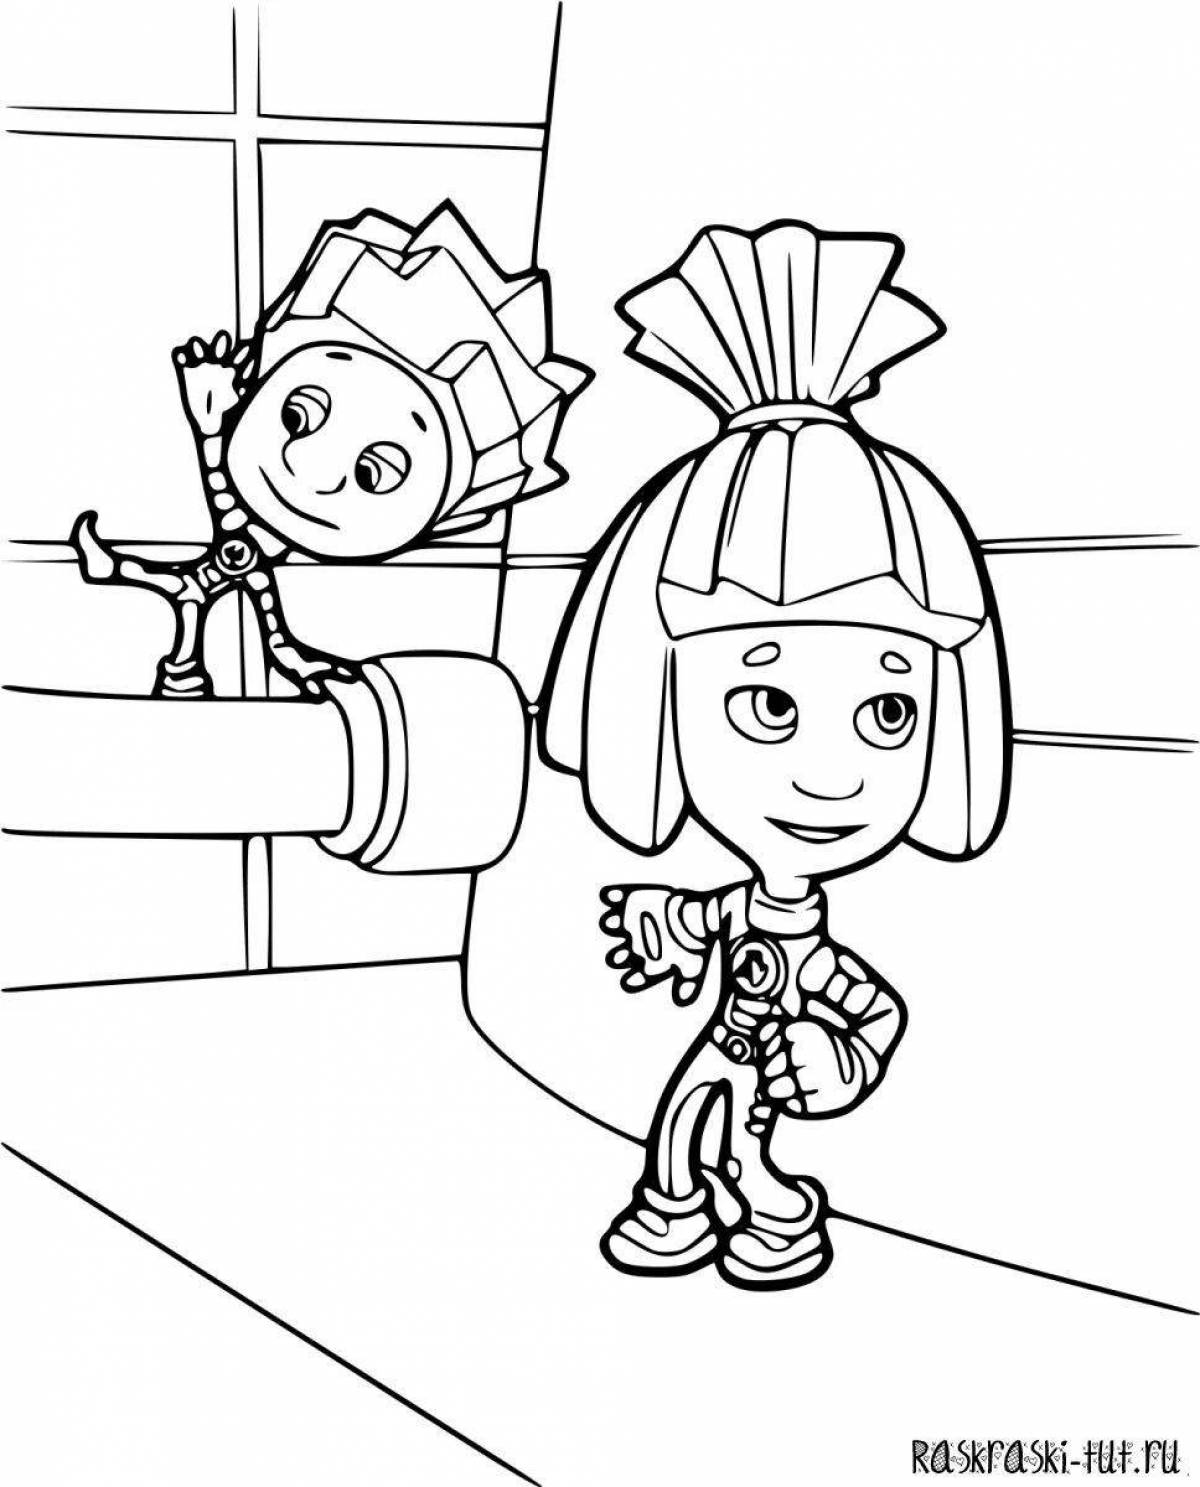 Gorgeous fixies coloring pages for girls